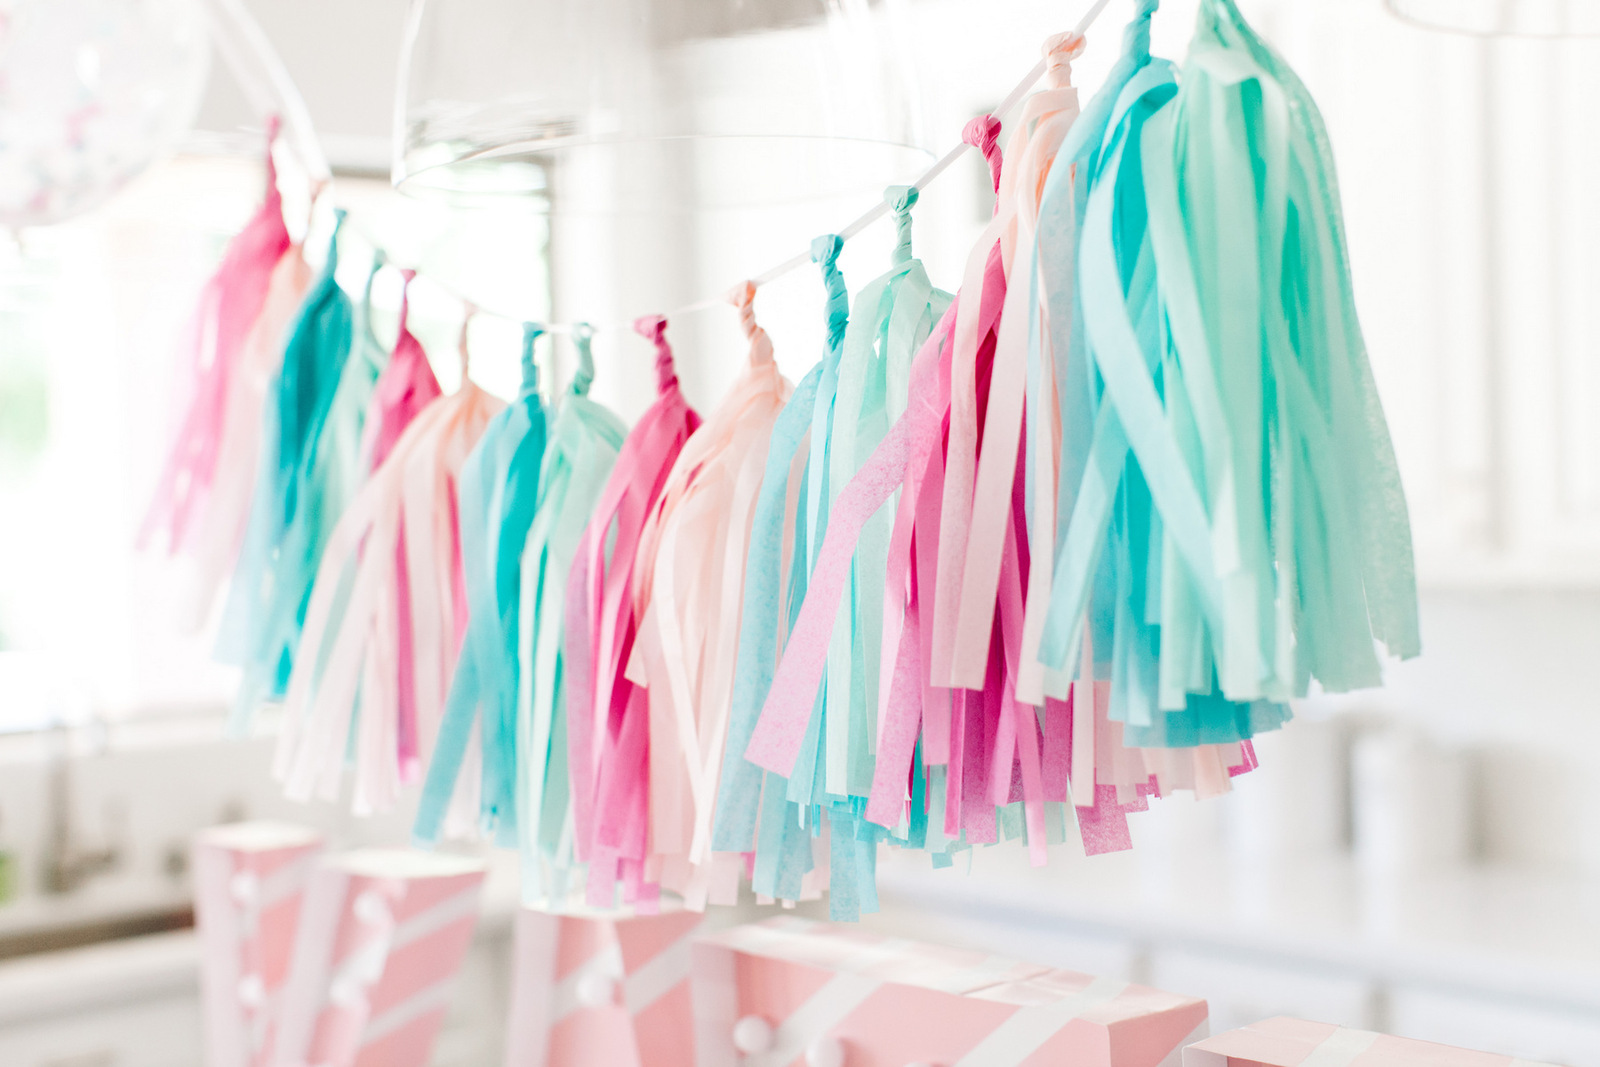 kates_cotton_candy_party_4